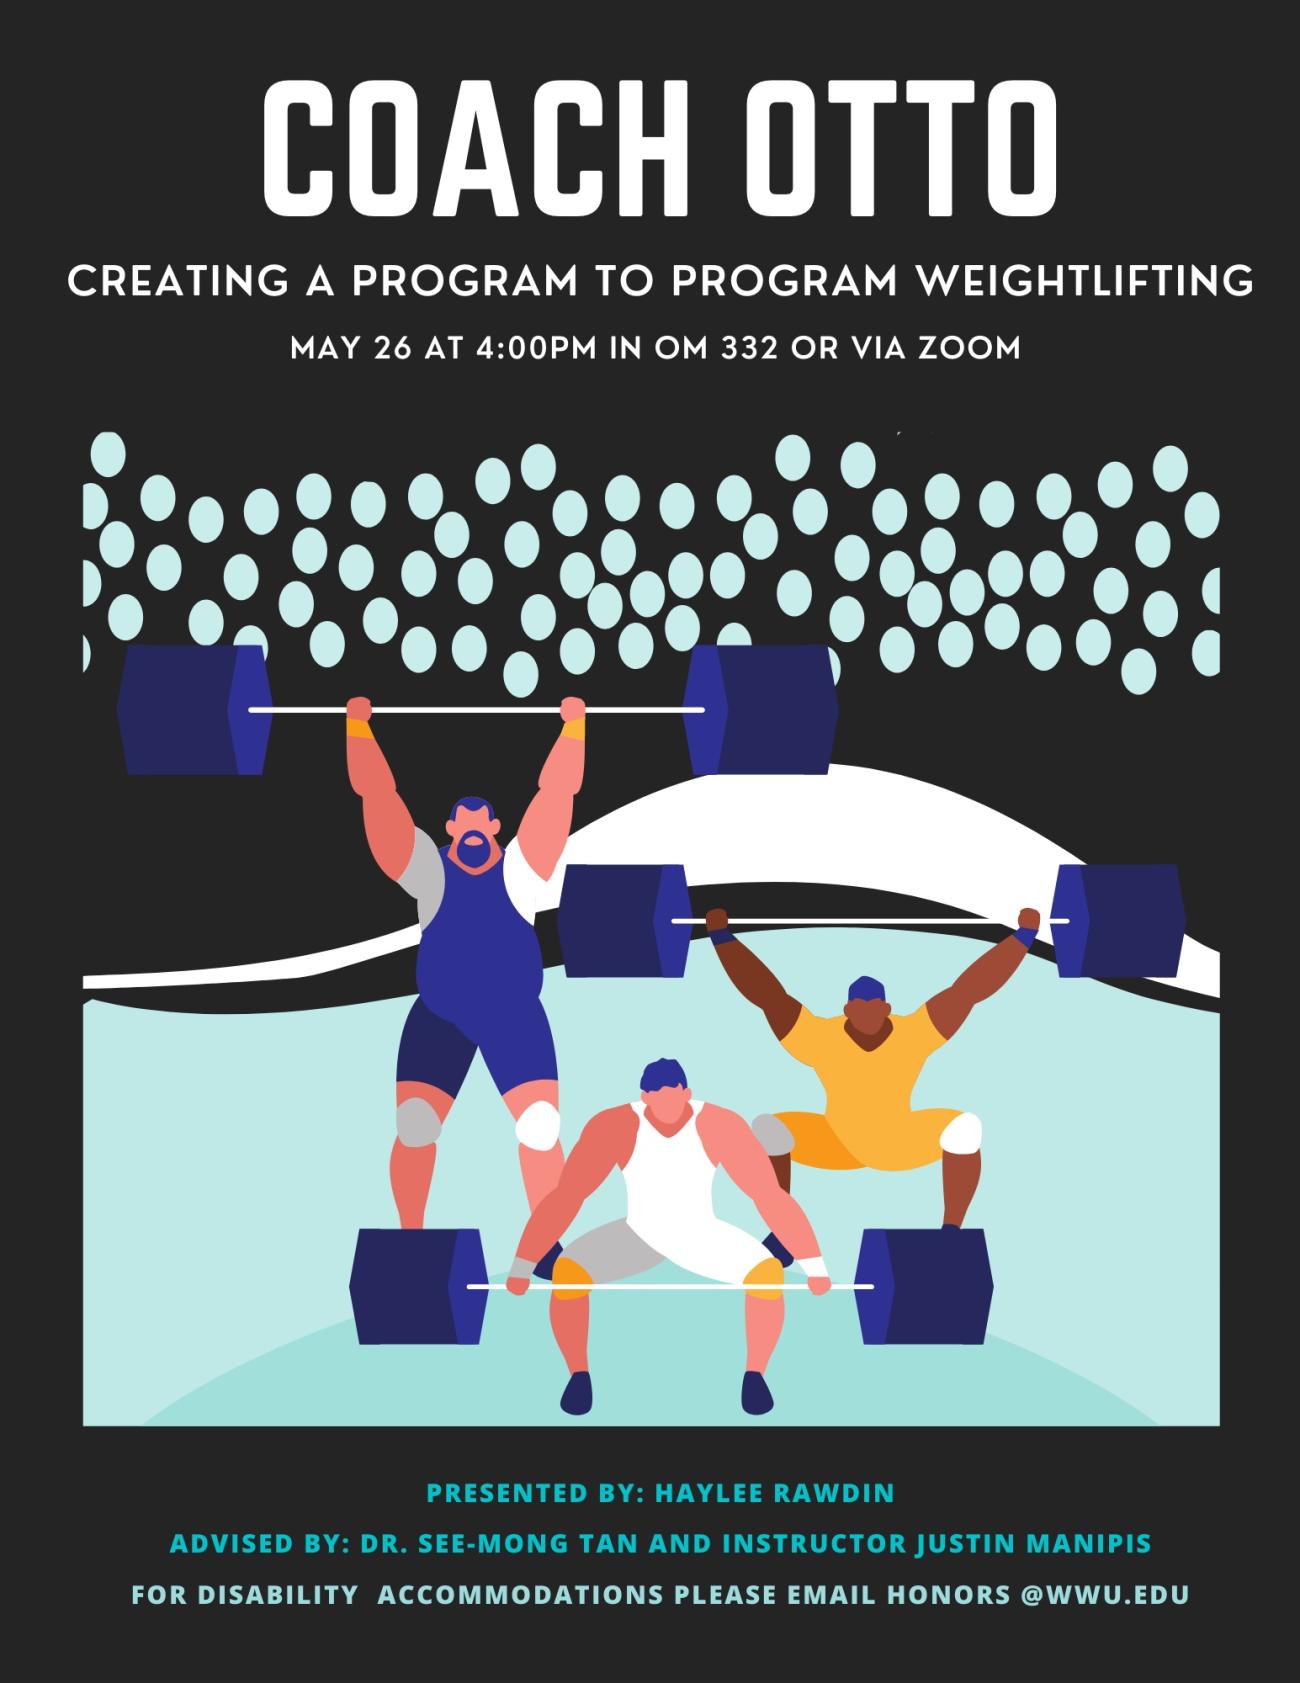 Dark background with cartoon image of three athletes performing olympic-style weightlifting. Text reads "Coach Otto. Creating a program to program weightlifting. May 26 at 4:00pm in OM 332 or via Zoom. Presented by: Haylee Rawdin, Advised by: Dr. See-Mong Tan and Instructor Justin Manipis. For disability accommodations please email honors@wwu.edu."